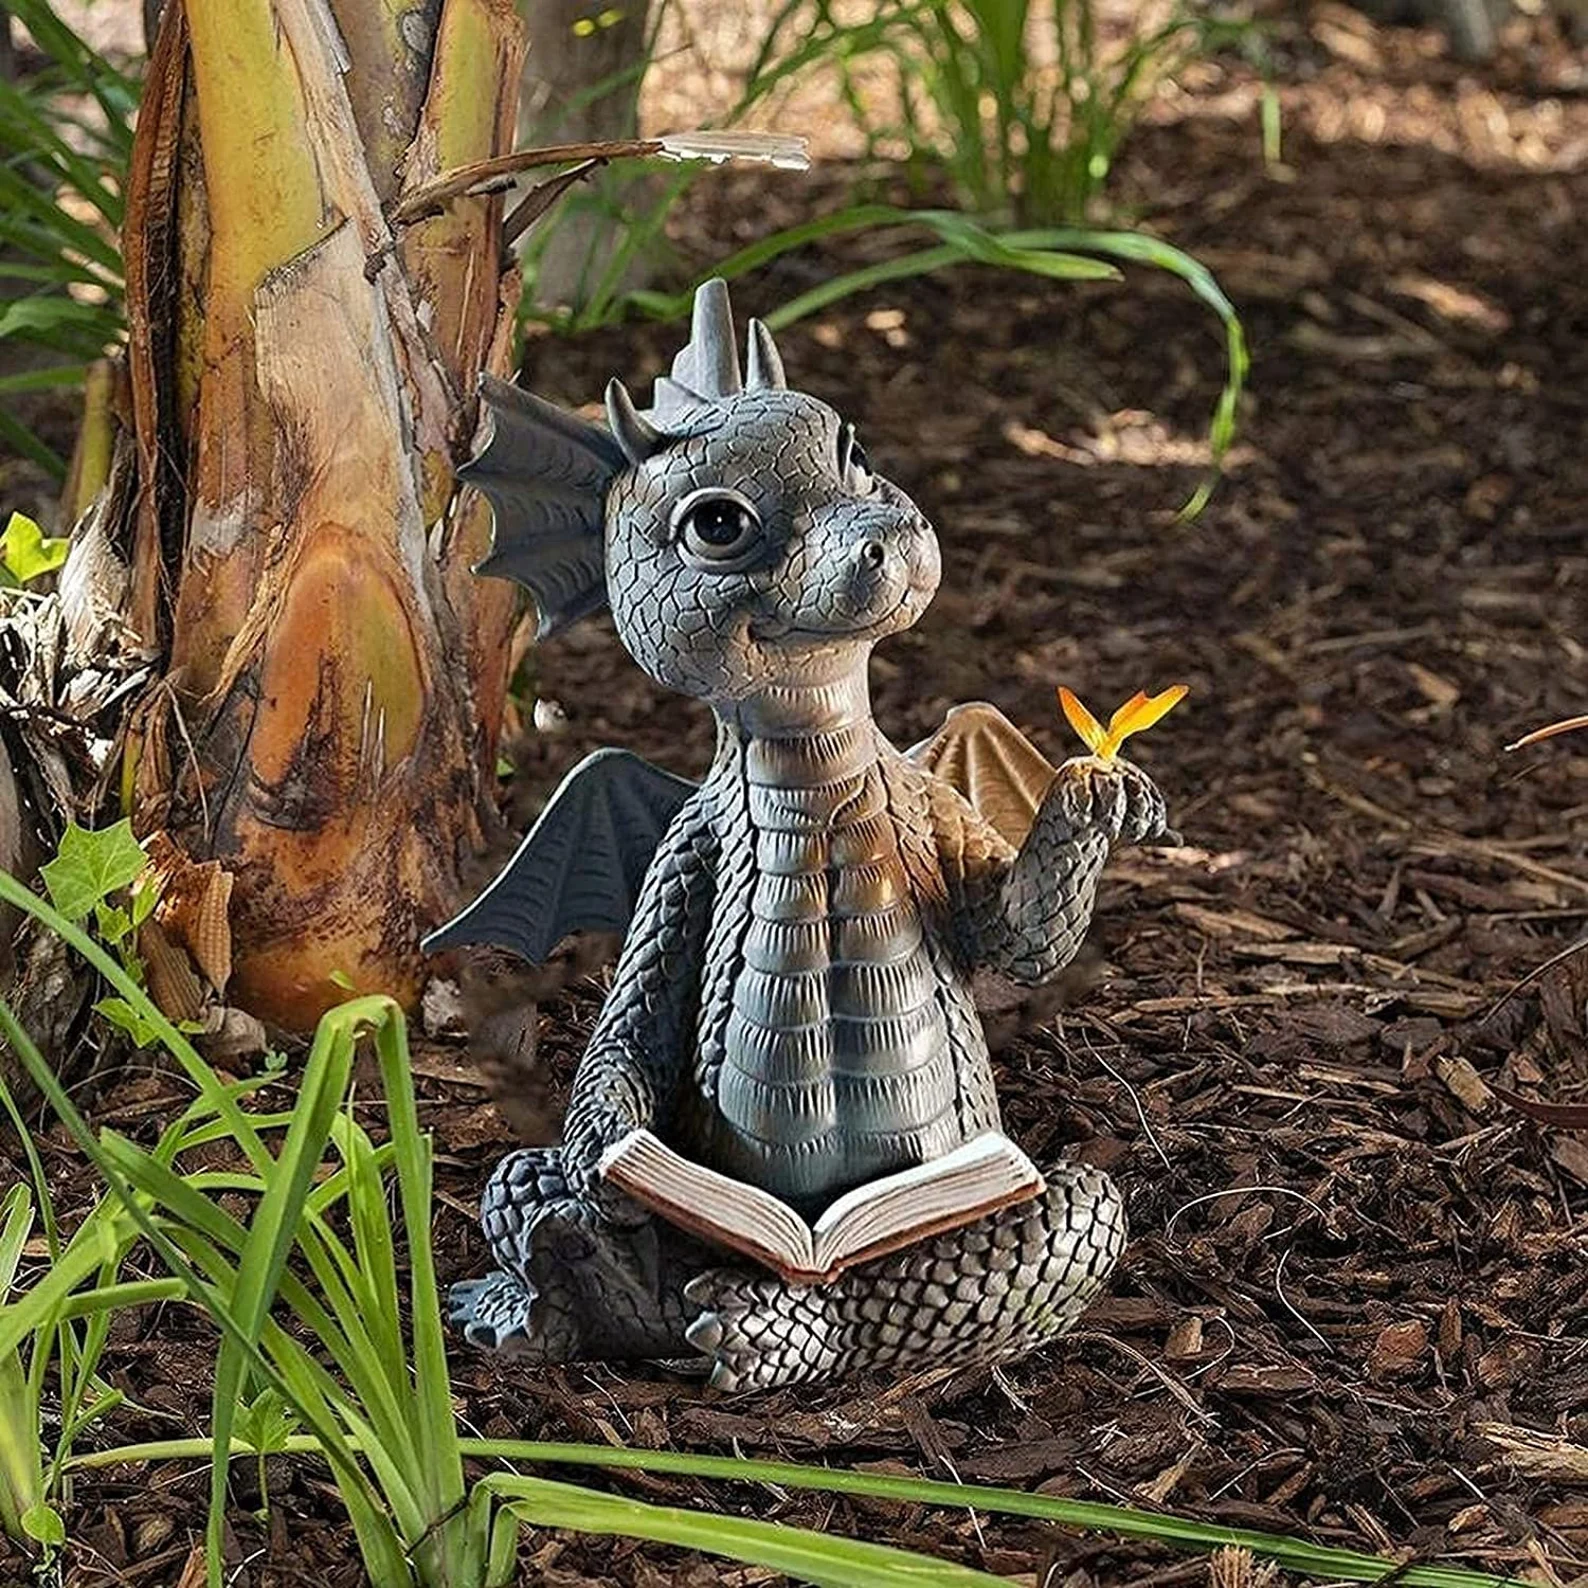 A small silver statue of a smiling dragon with a book open in its lap.